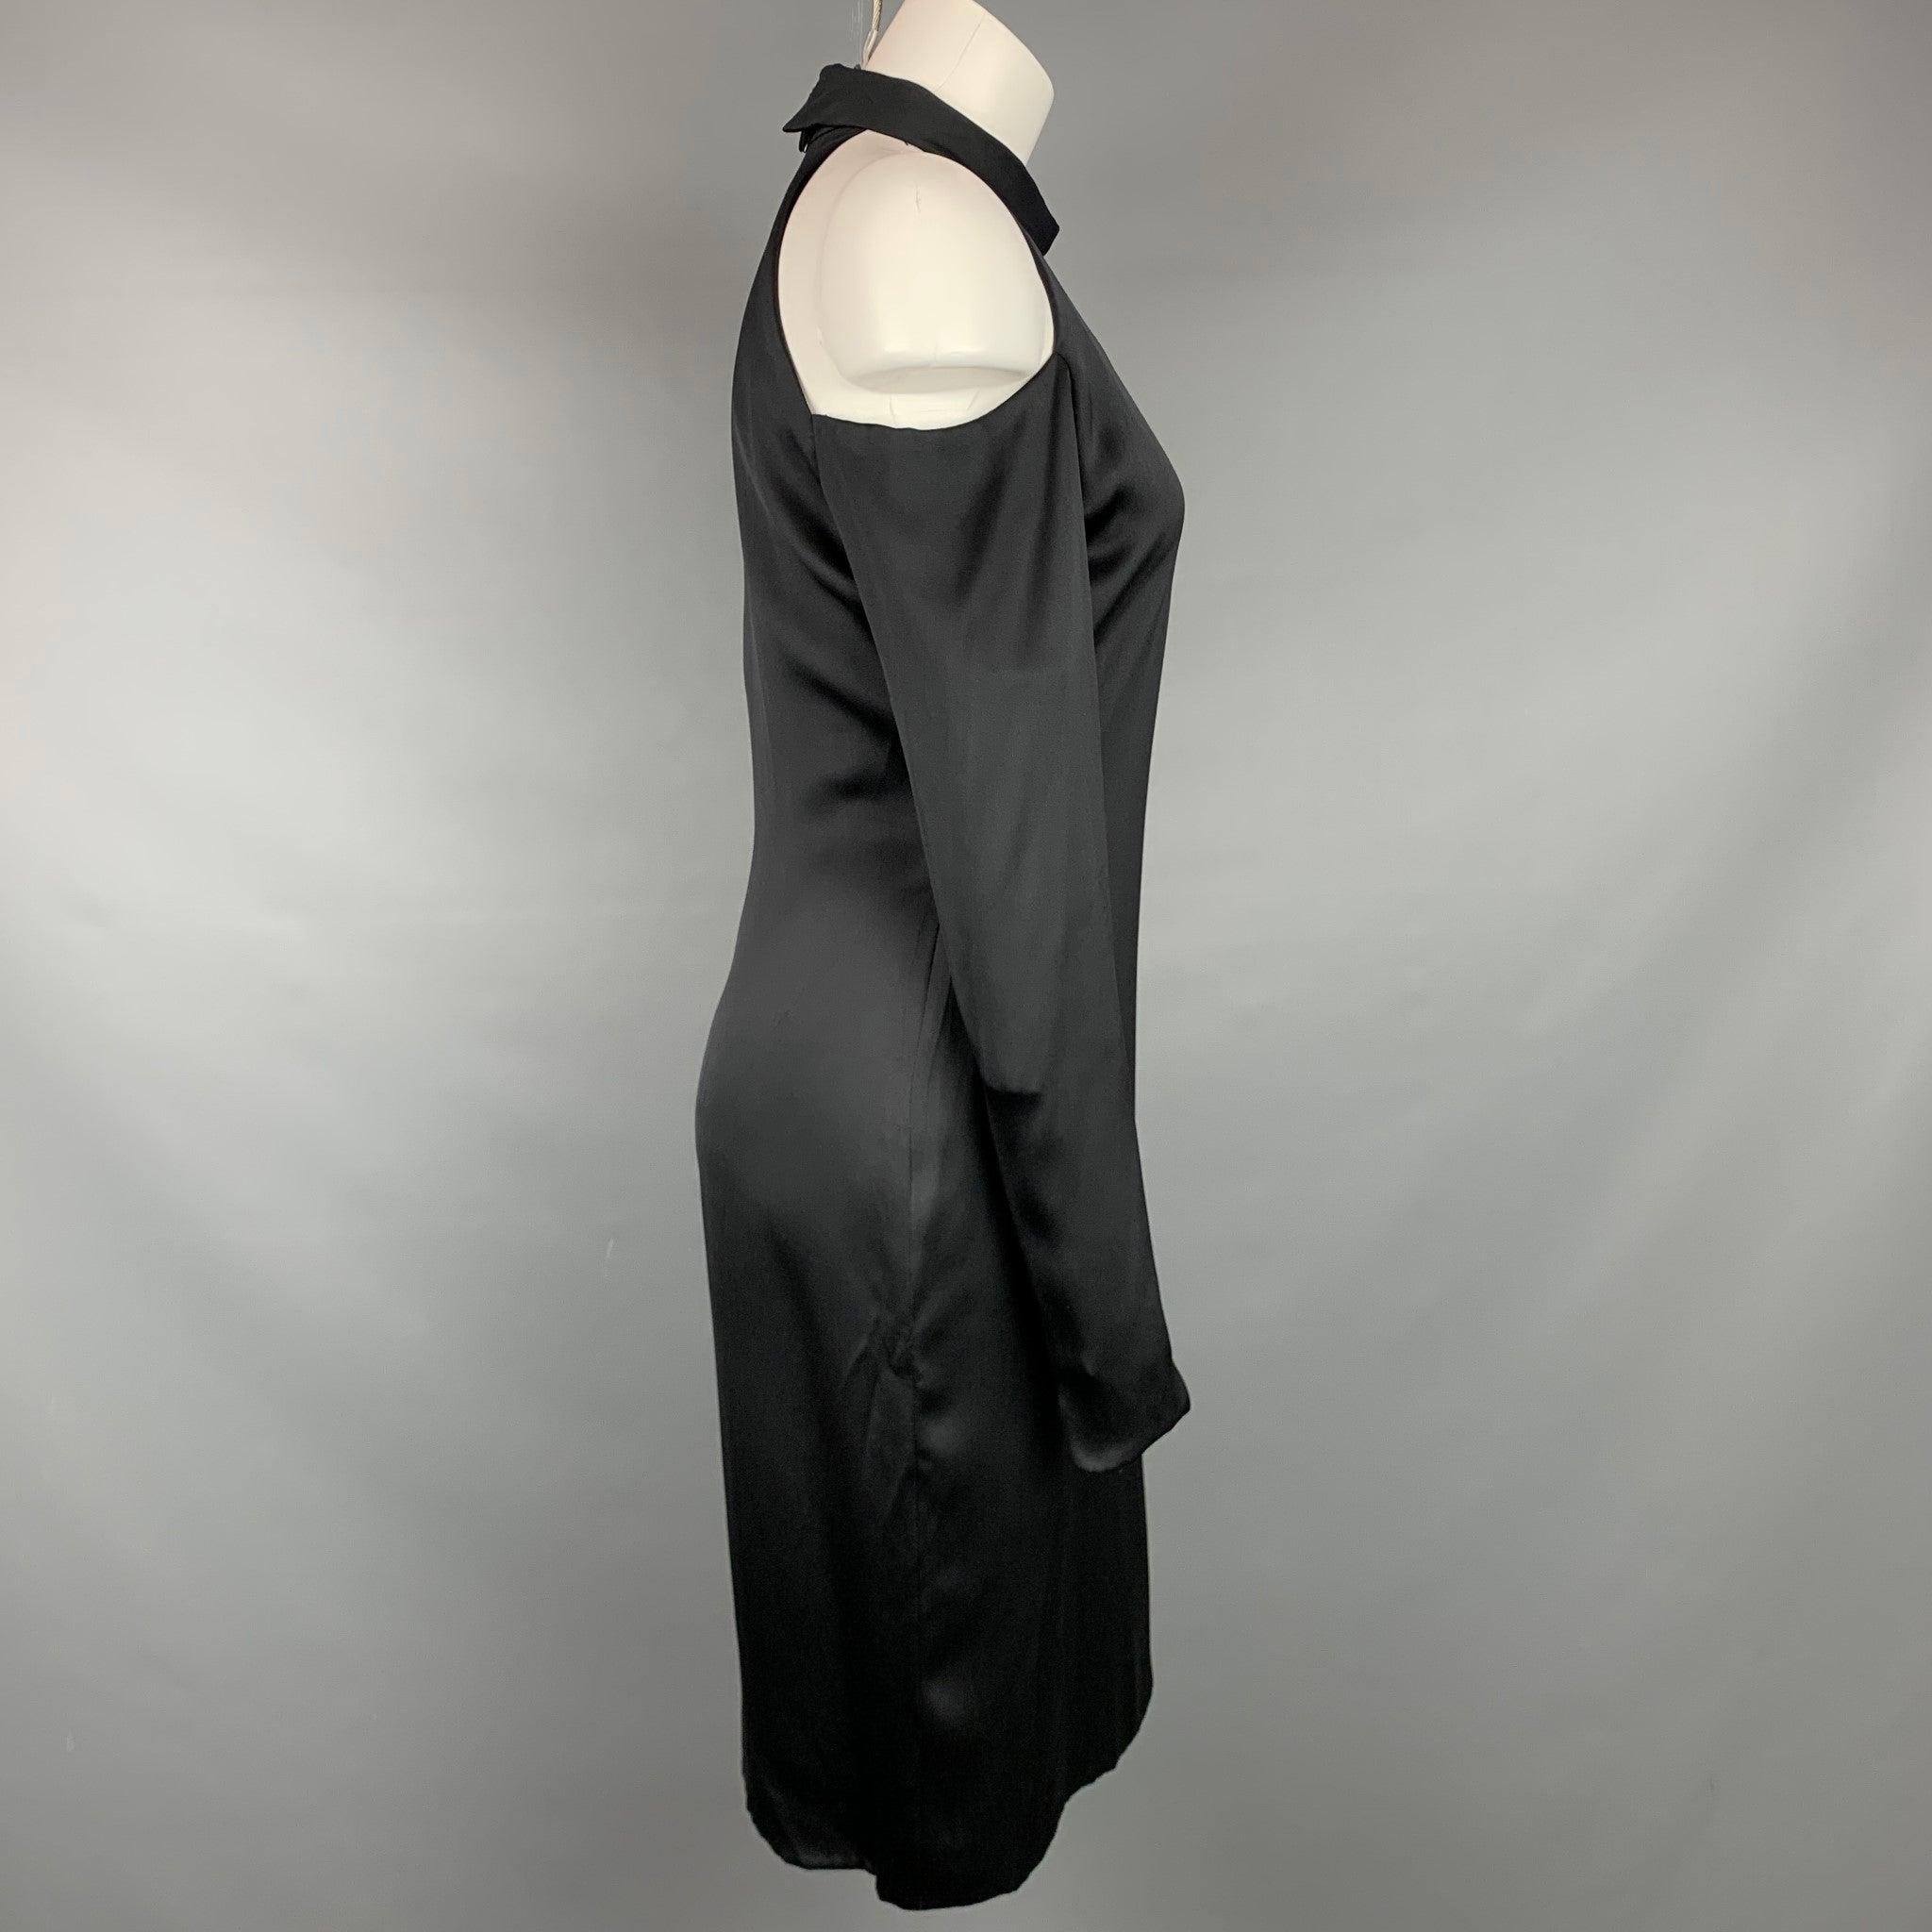 BILL BLASS Size M Black Silk Shoulder Cut Out Cocktail Dress In Good Condition For Sale In San Francisco, CA